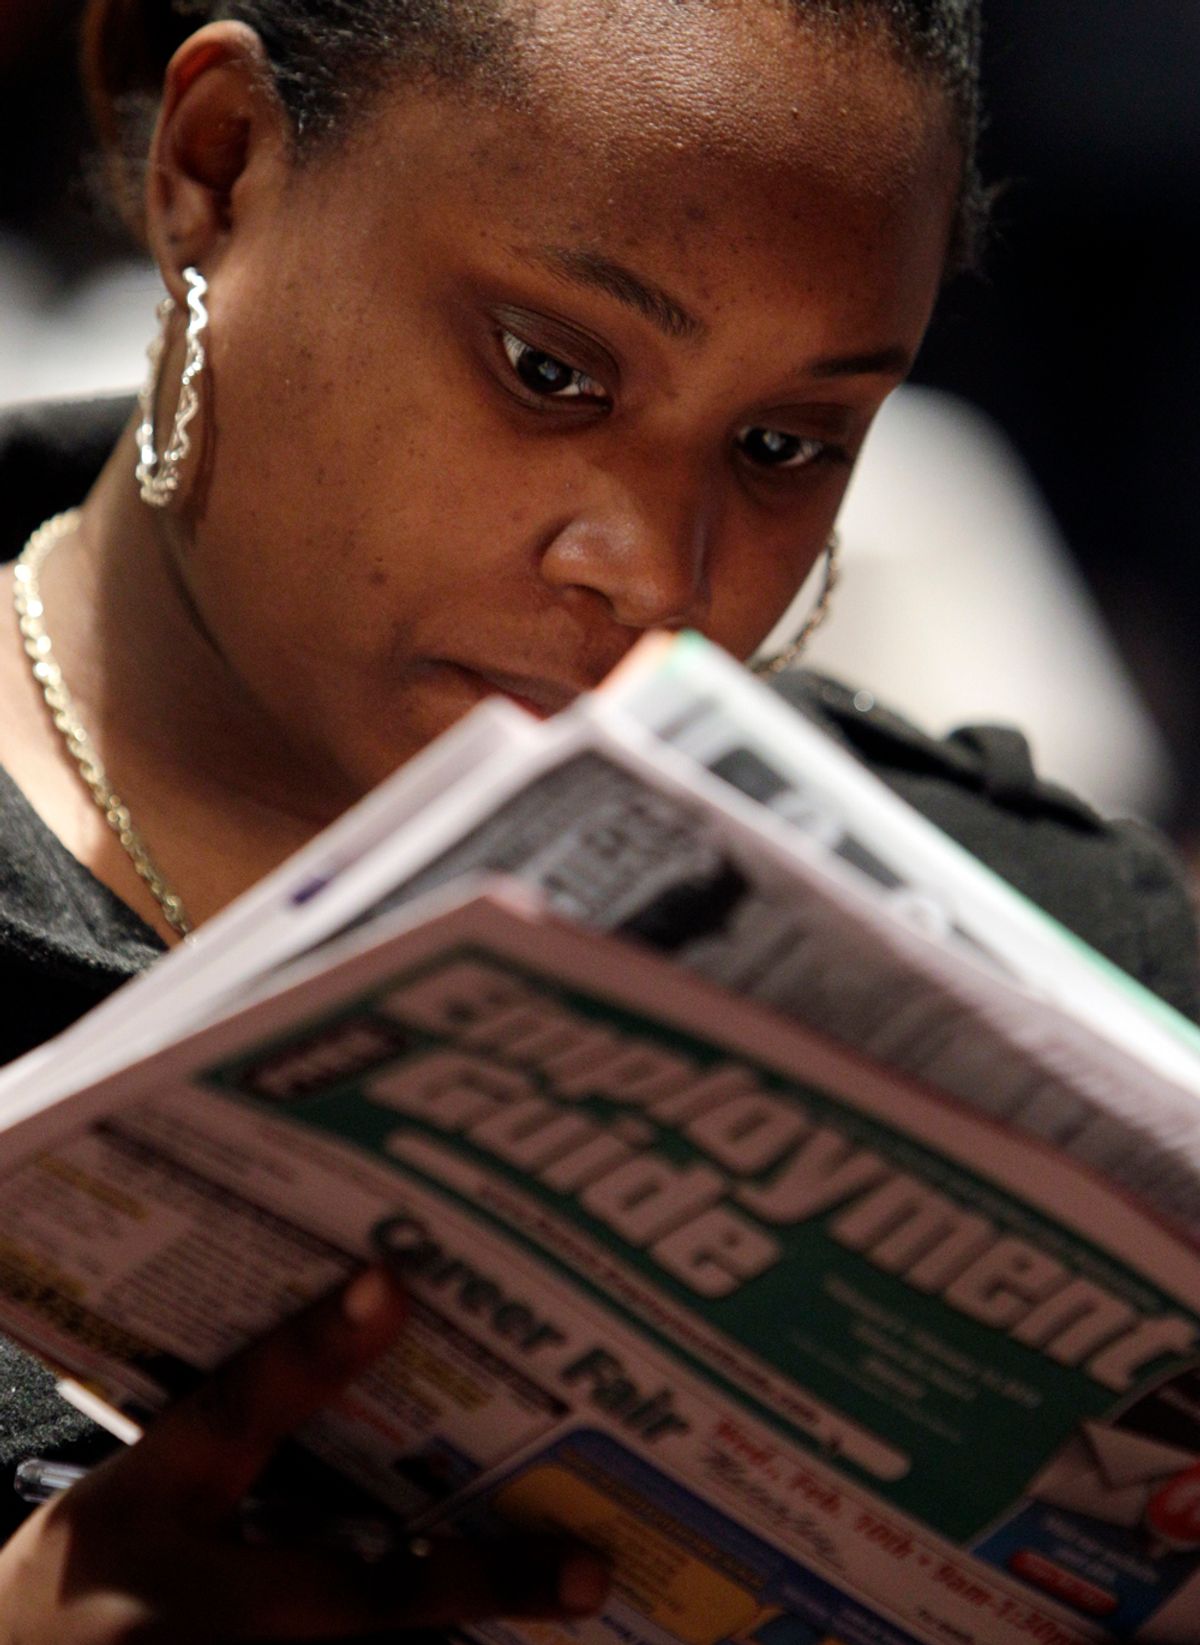 Santilya Bailey, of Detroit, looks for employment while attending a job fair in Detroit Wednesday, Feb. 10, 2010. The number of newly laid-off workers seeking unemployment benefits fell sharply last week, a hopeful sign the job market may be improving.(AP Photo/Paul Sancya)   (Paul Sancya)